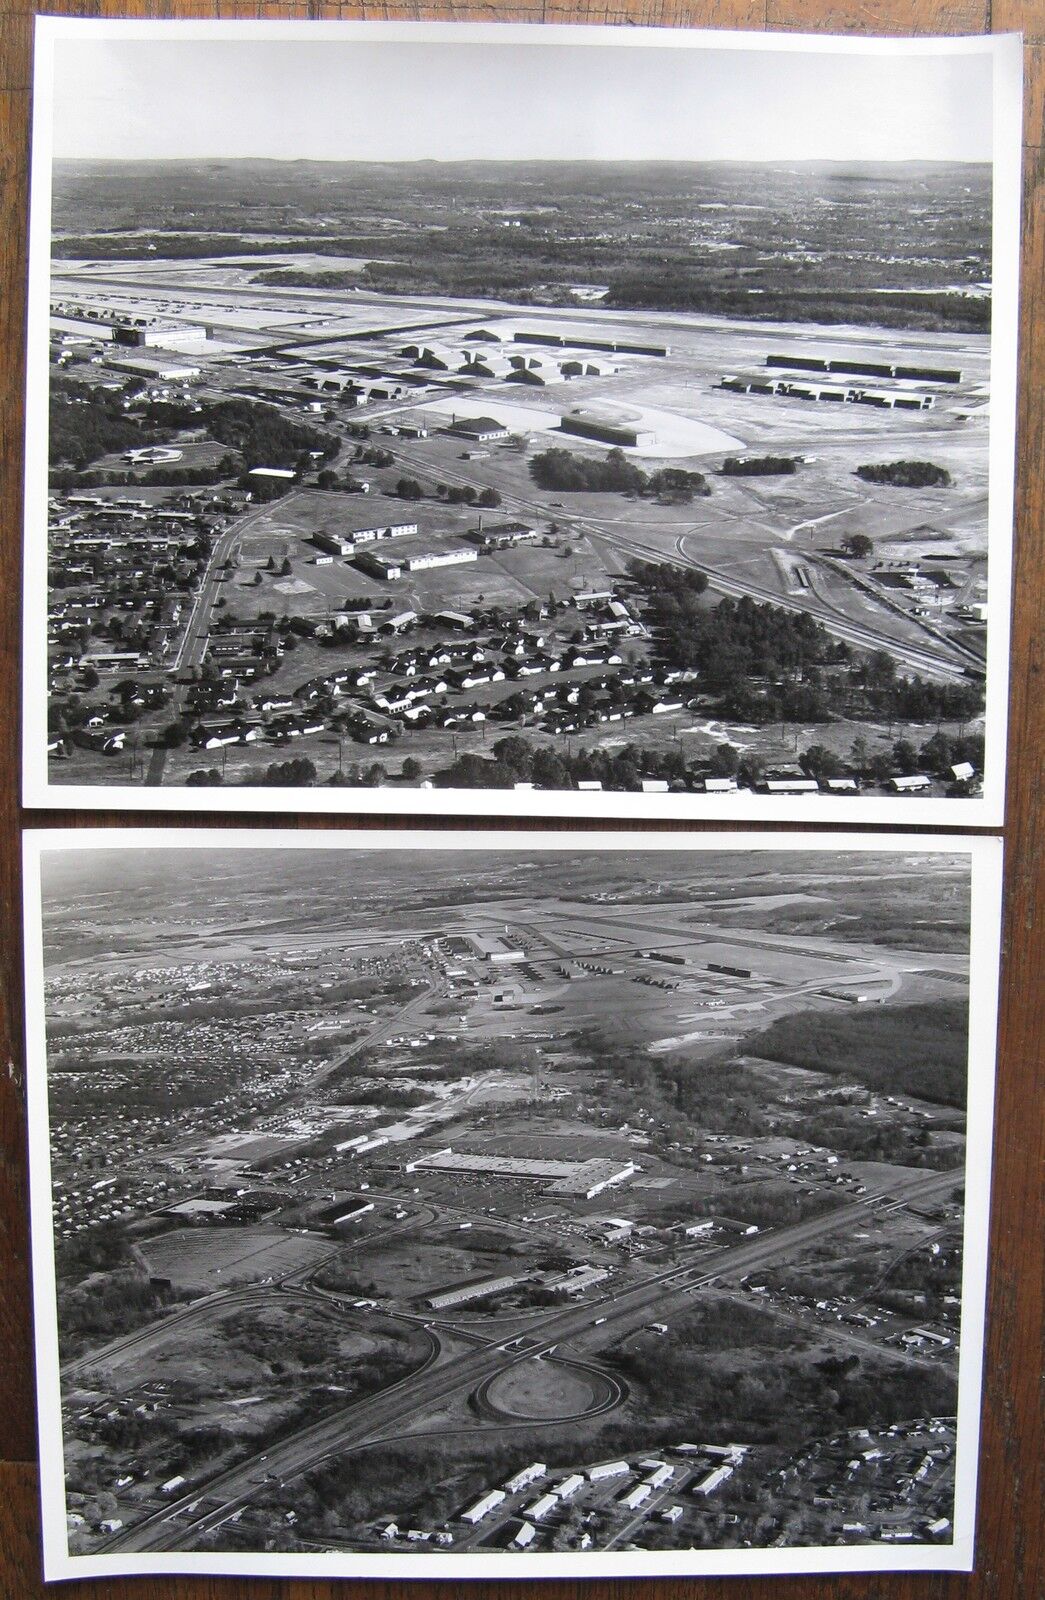 Two unidentified Photos of a Military Base or Airport ?